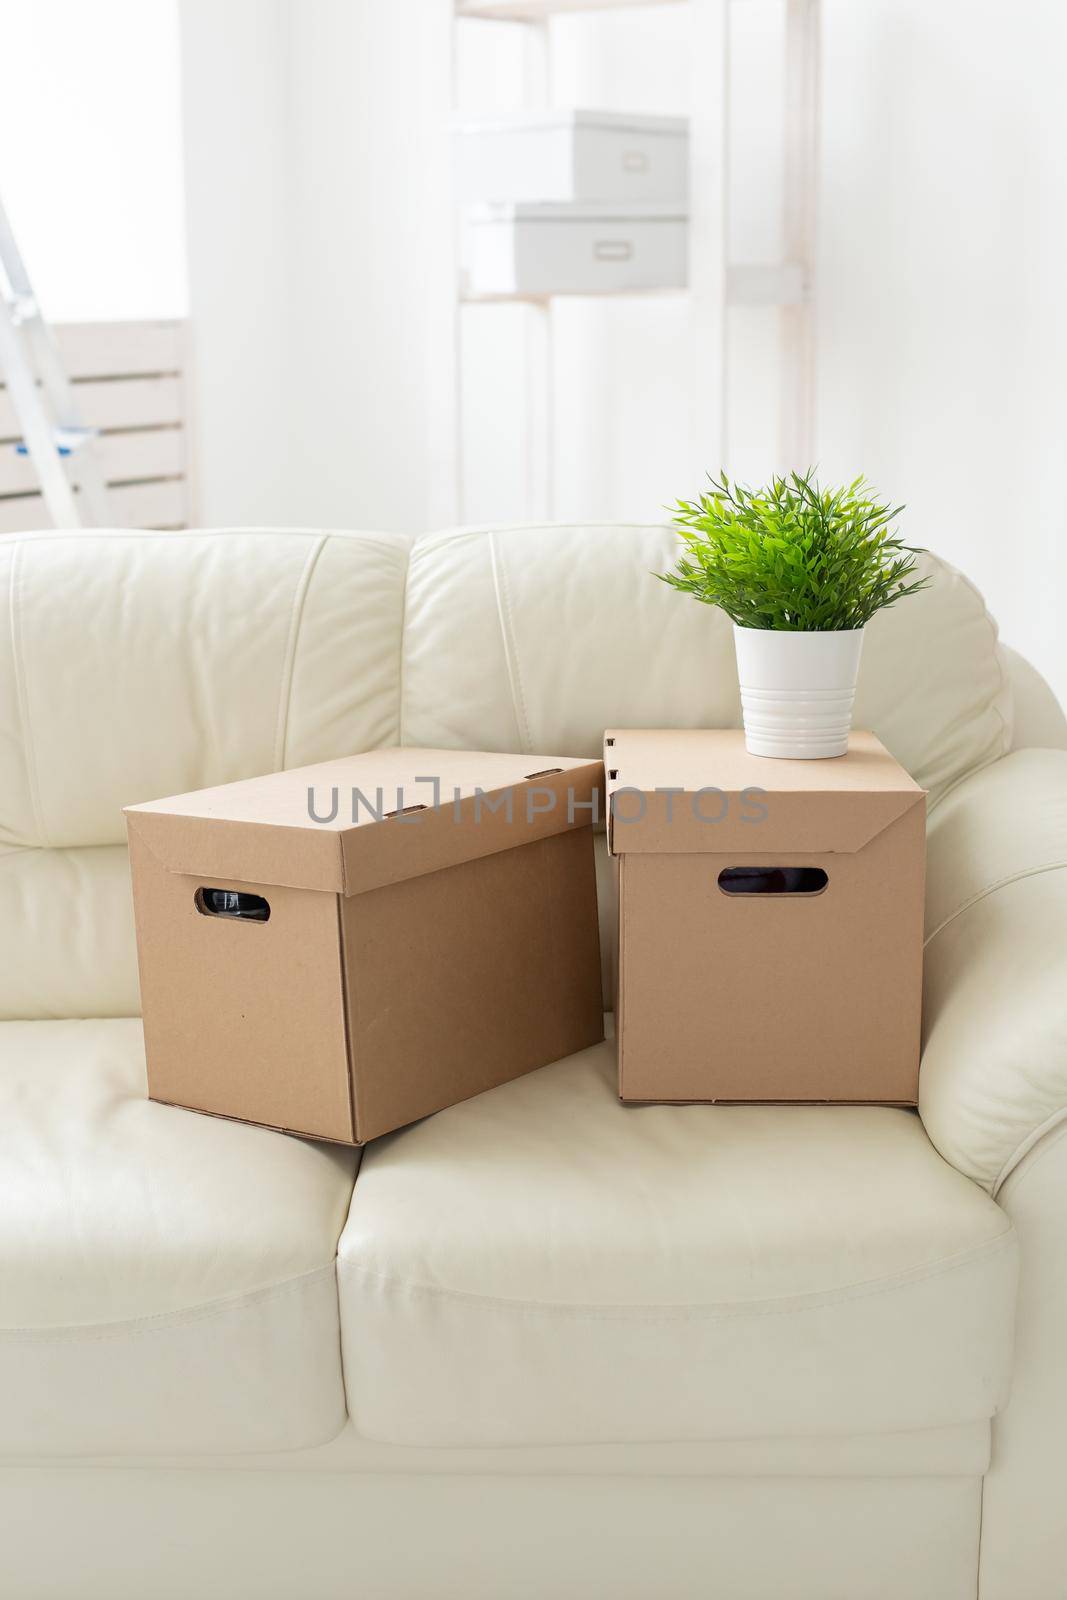 Boxes with things and a flower in the pot stand on the couch during the move of residents to a new apartment. The concept of home buying and the hassle of moving. by Satura86